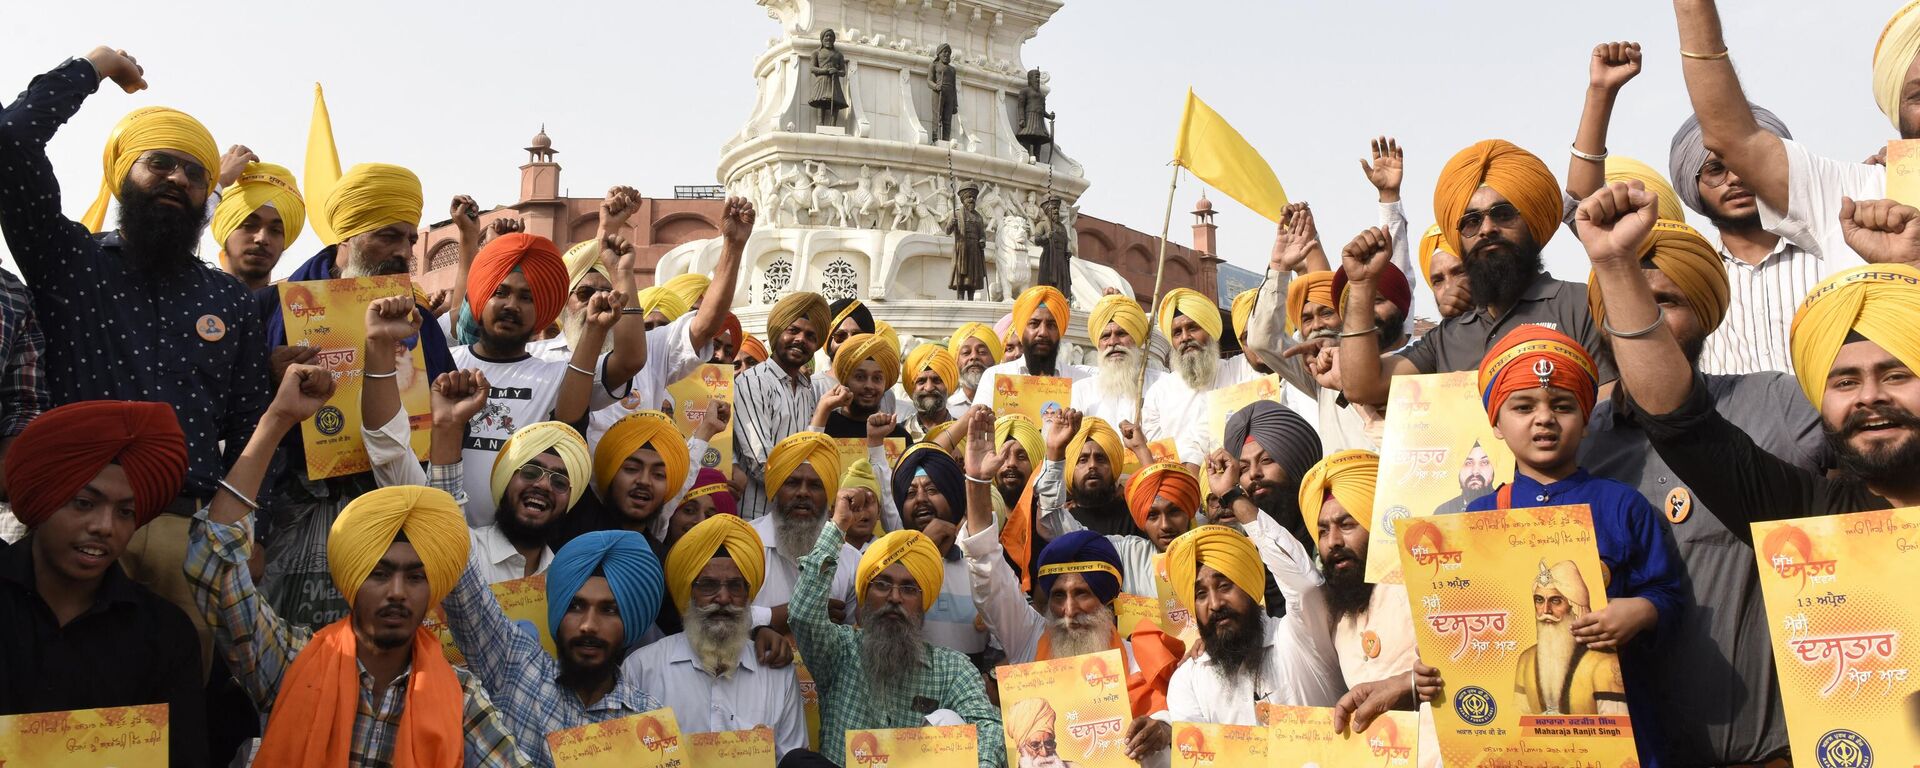 Members of the Sikh organization Akal Purakh Ki Fauj shout slogans and hold placards during 'Turban Day', which aims to inspire pride and maintain the distinct identity of Sikhs in the world, celebrations in Amritsar on April 13, 2022.  - Sputnik International, 1920, 02.05.2022